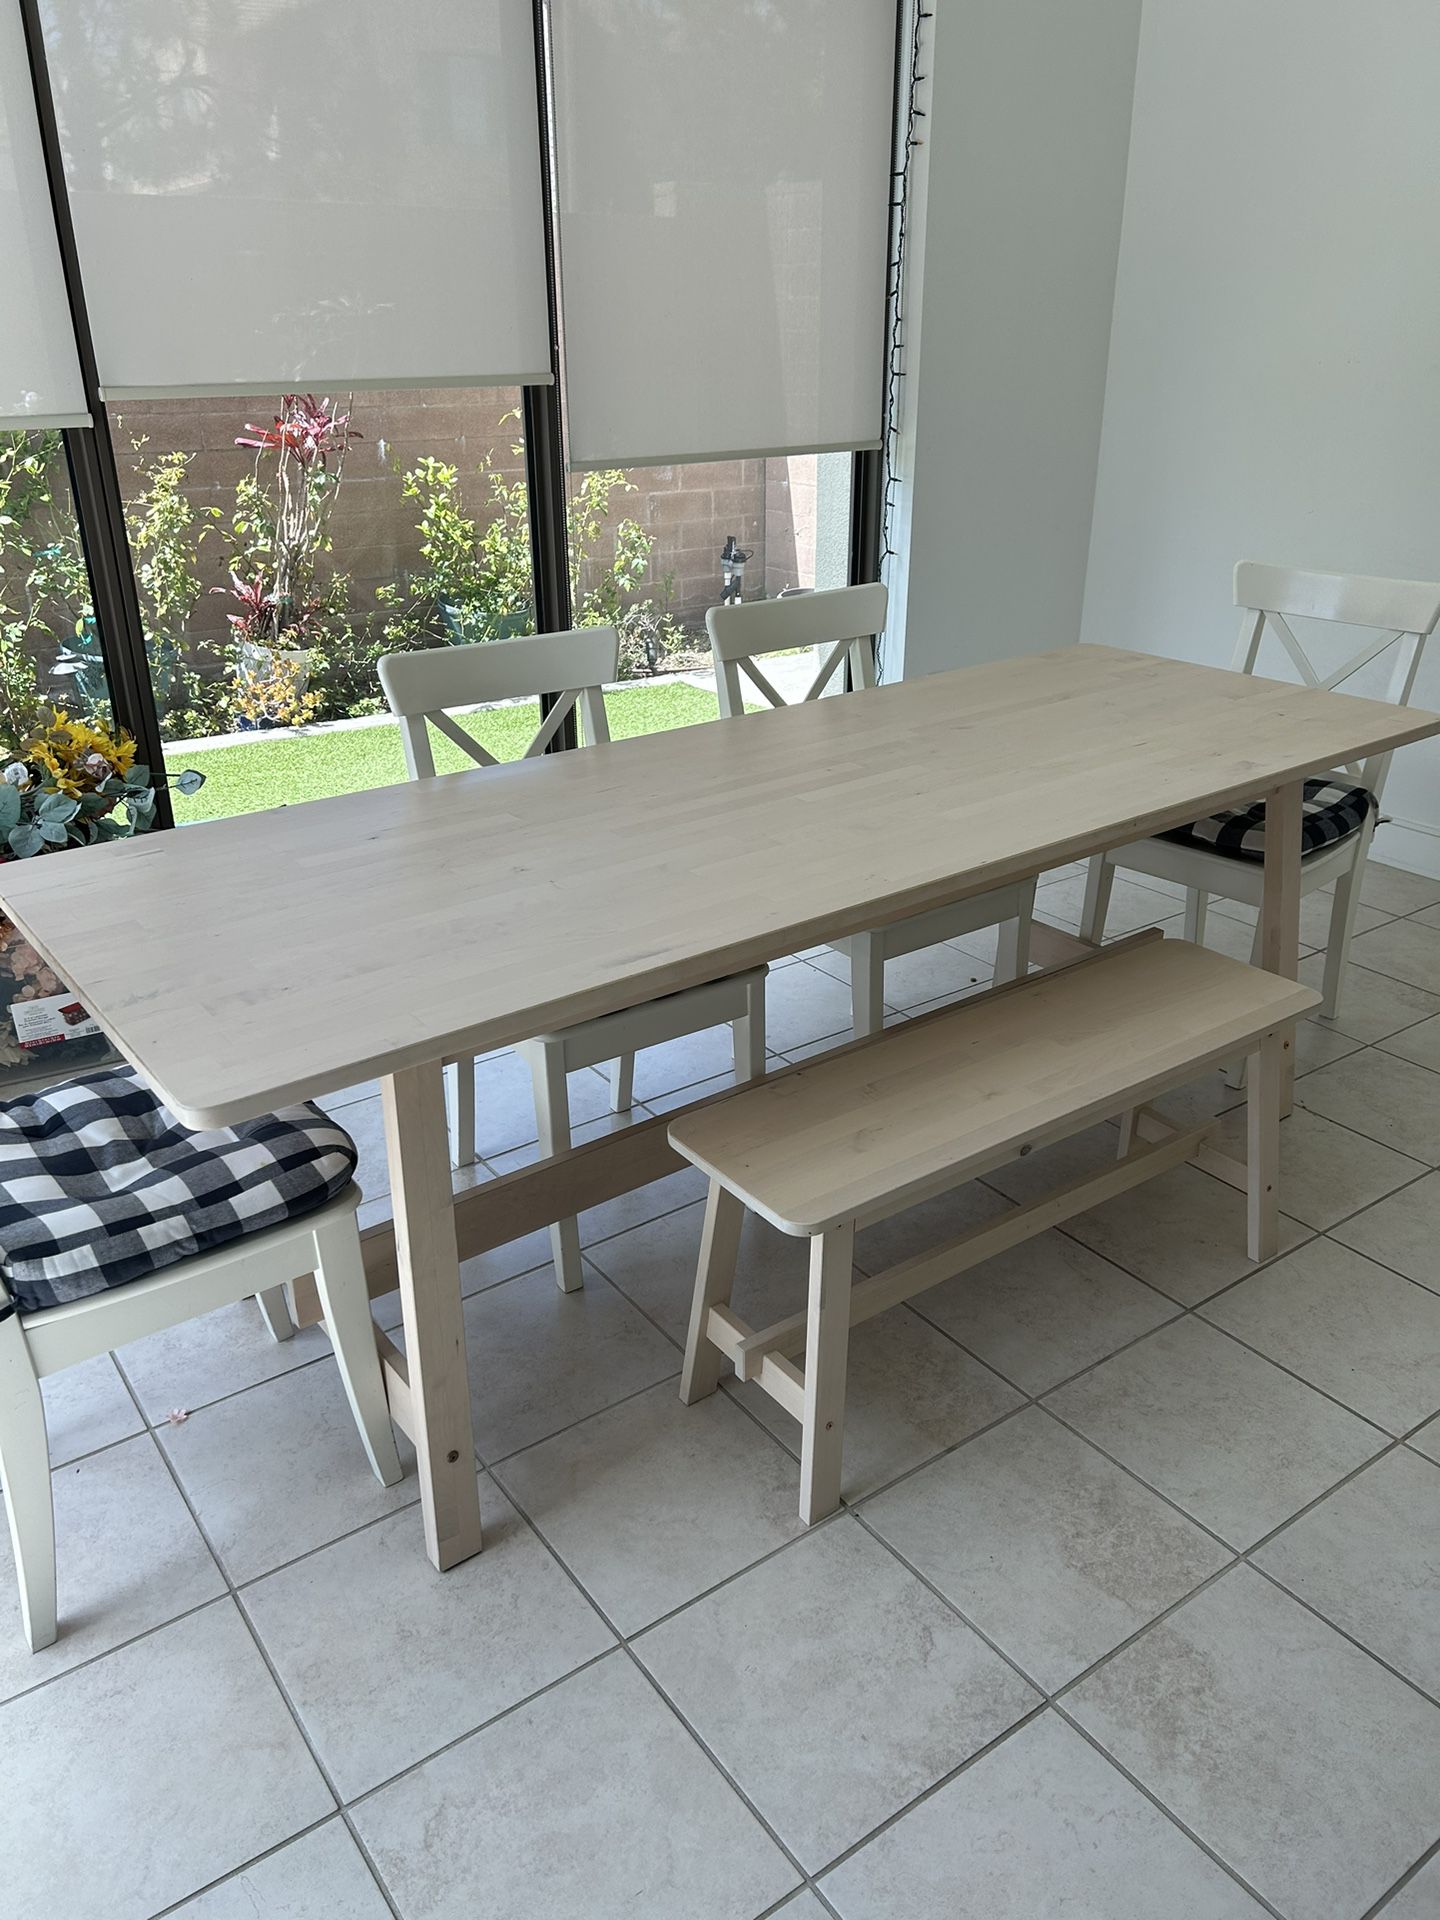 IKEA Dining Table Set With 4 Chairs And Bench